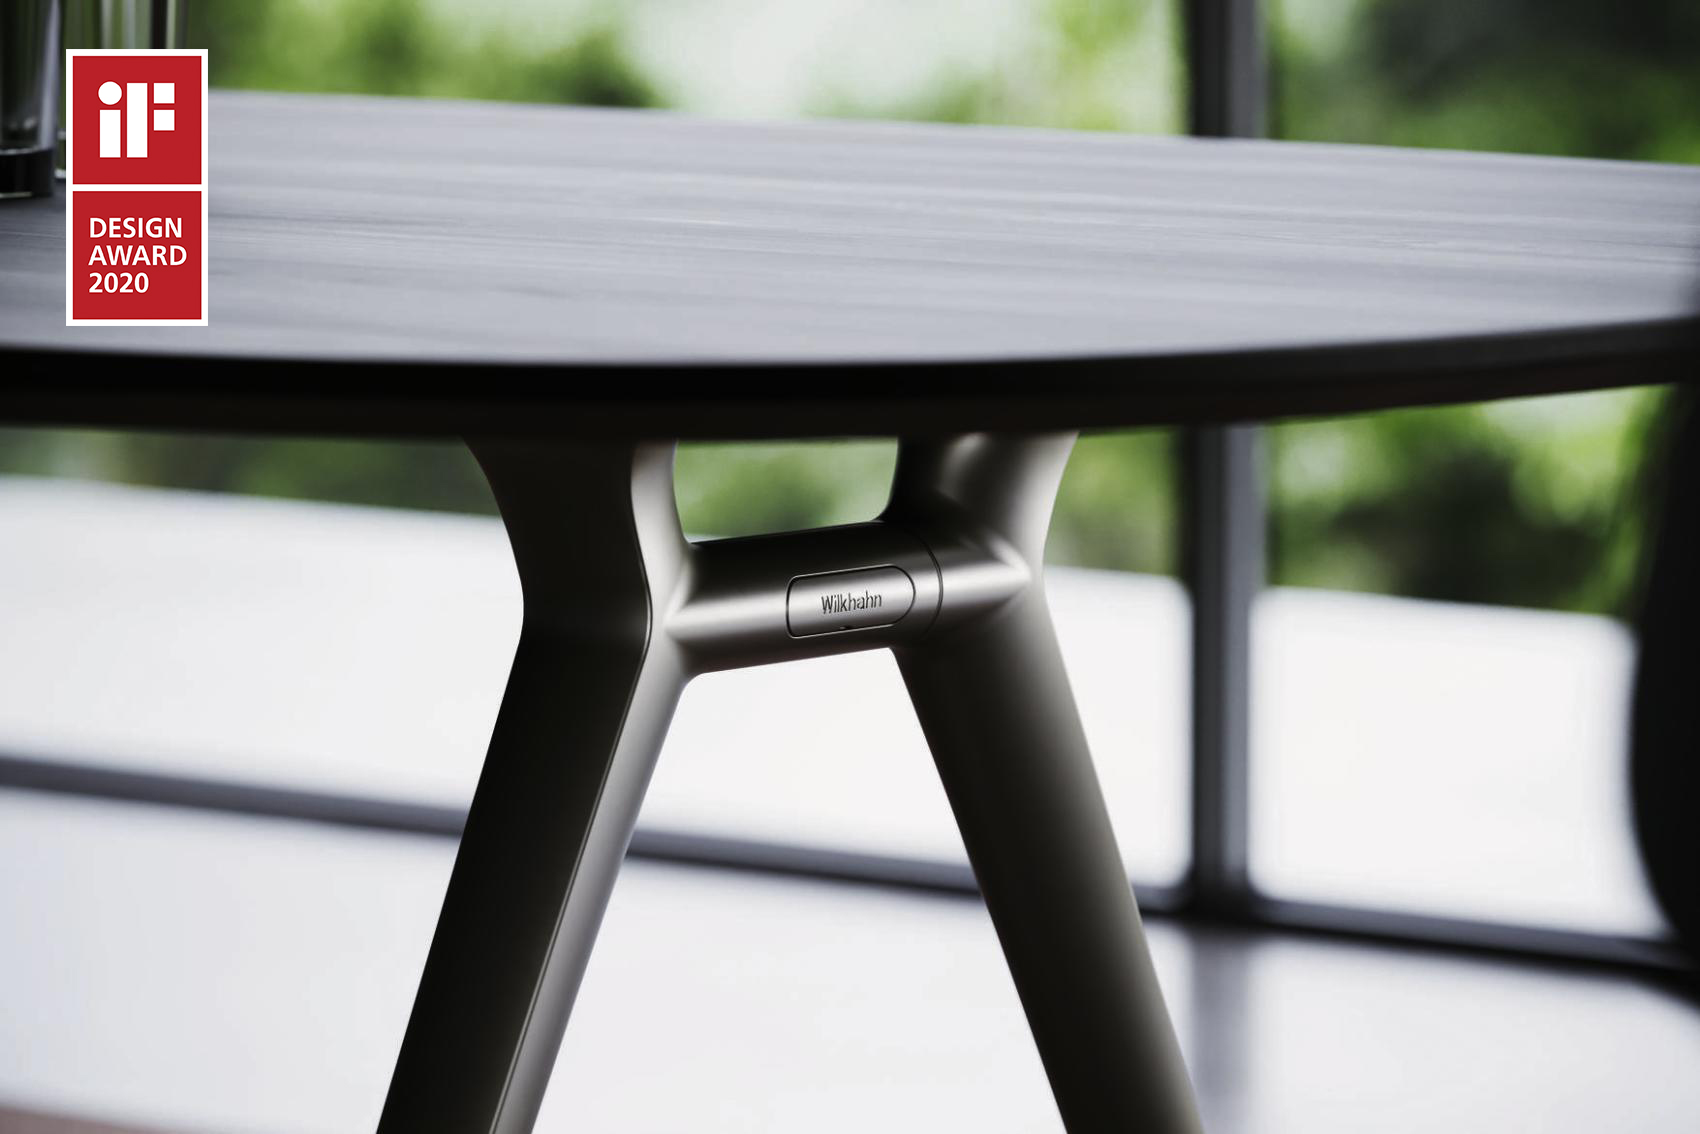 modular conference table design